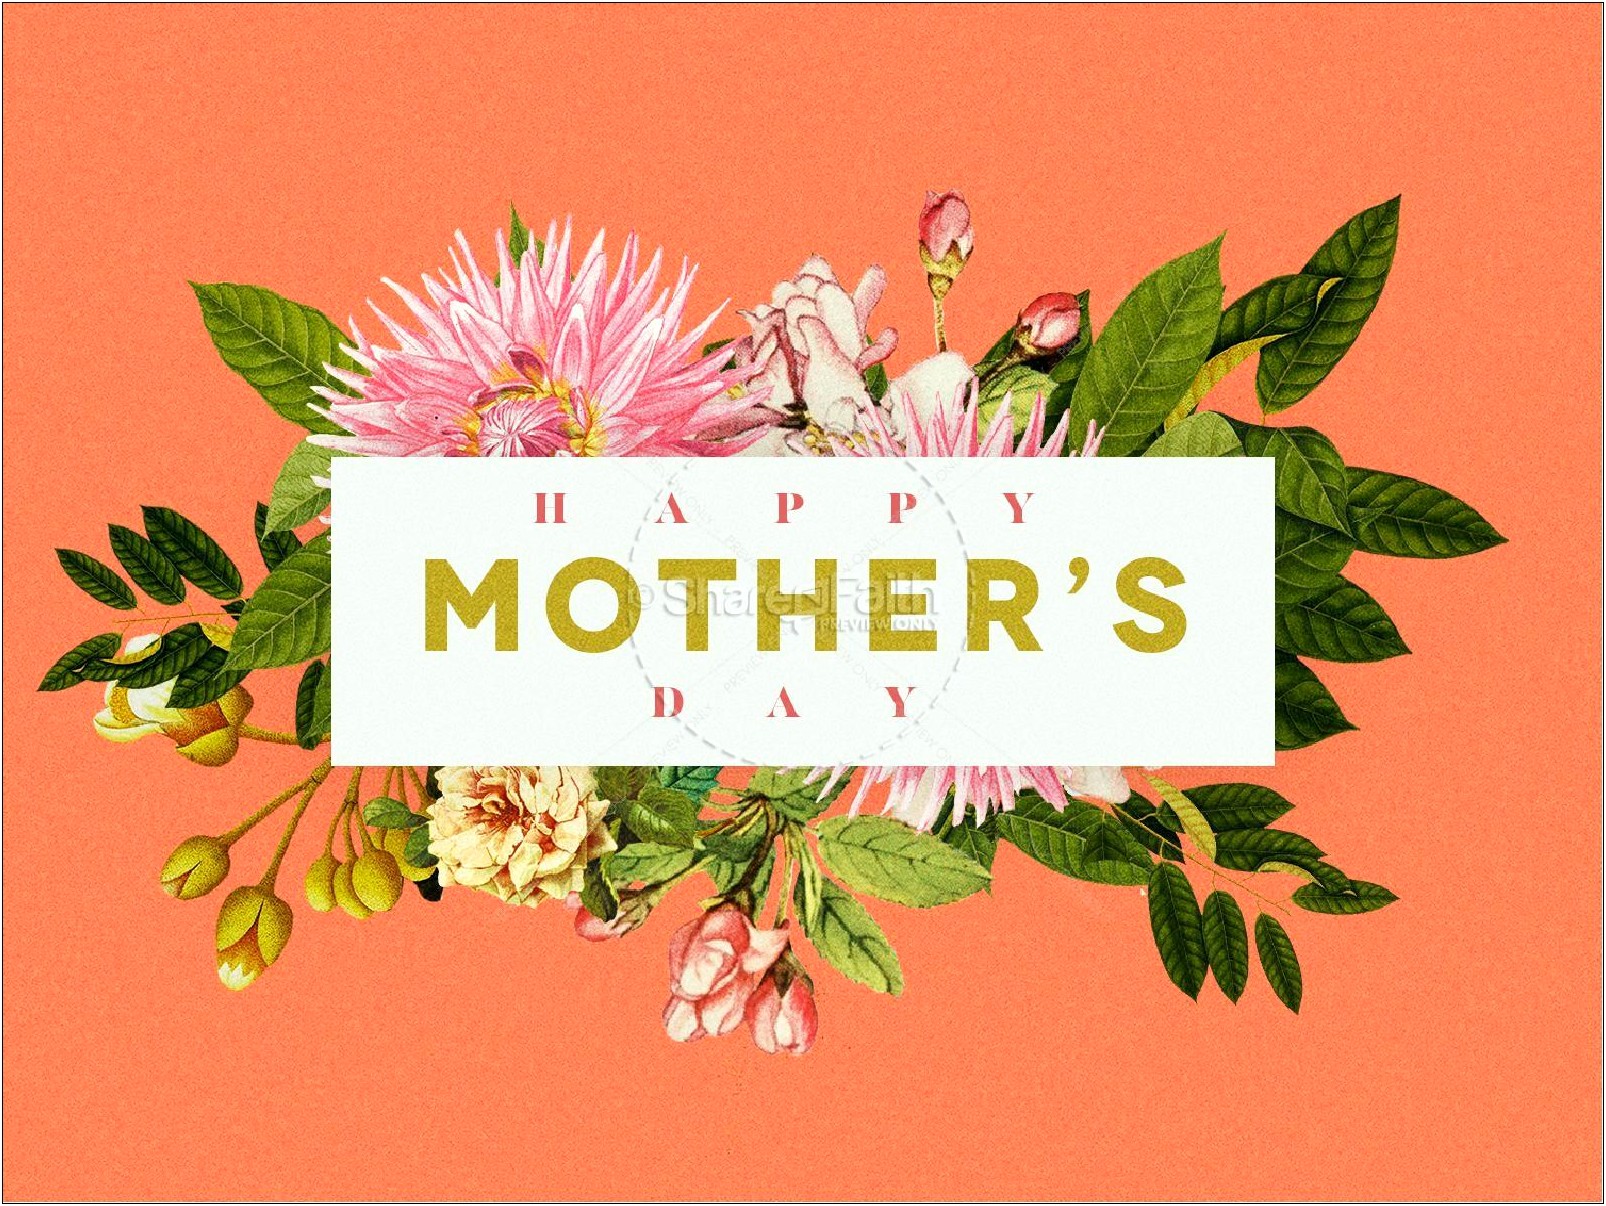 Mother's Day 2017 Church Powerpoint Templates Free